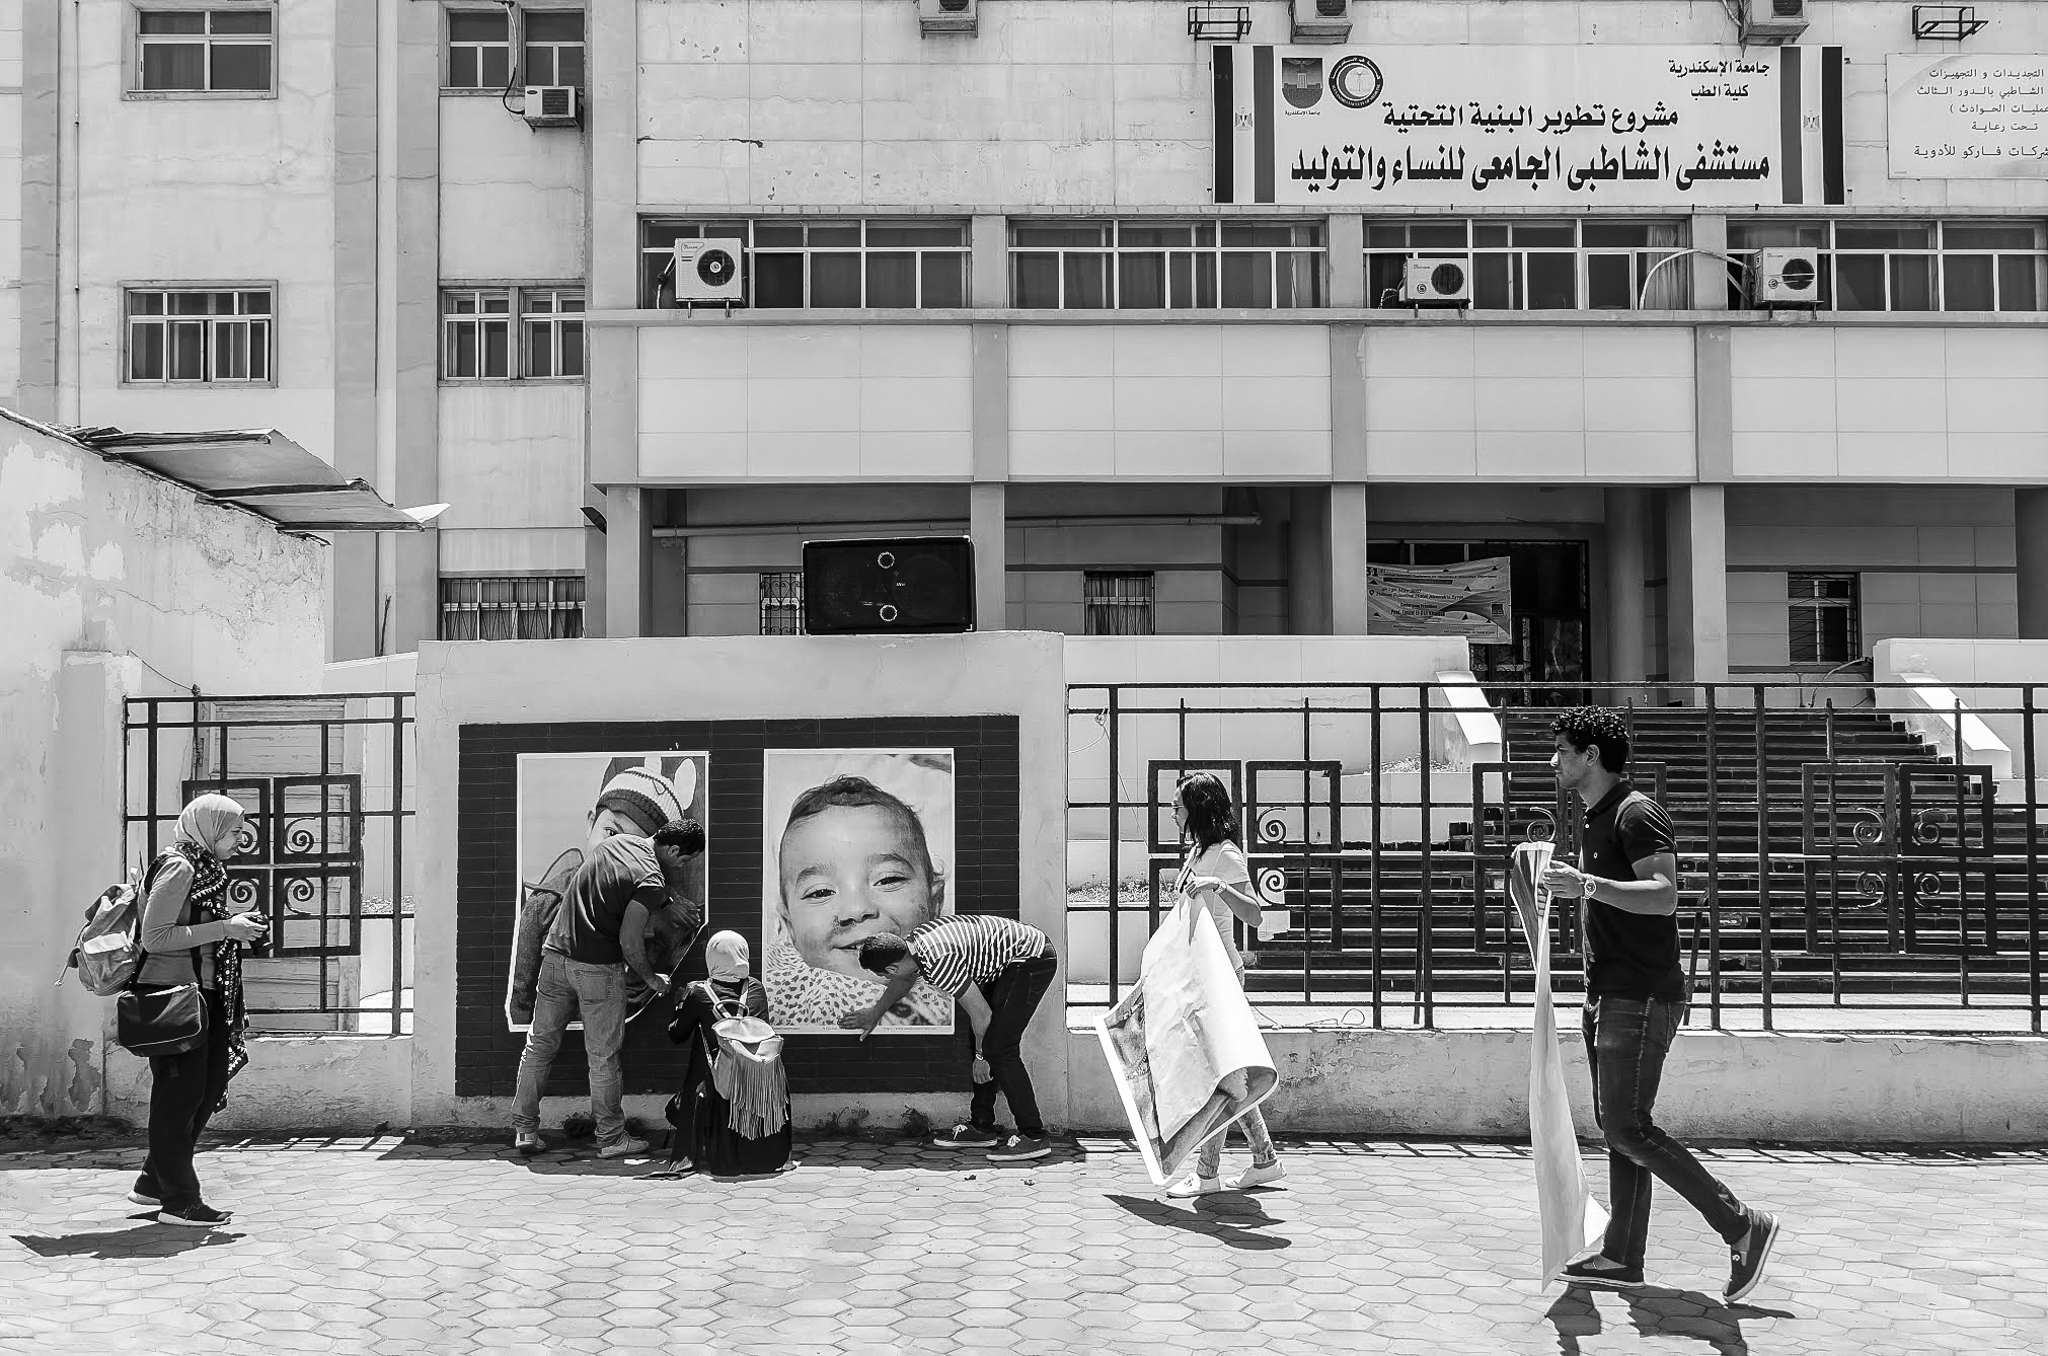  El Shatby university hospital serves a population of around 5 million child and infant.&nbsp;The pediatric surgery department performs around 7000 surgeries annually free of charge for the underprivileged children born with congenital anomalies.&nbs